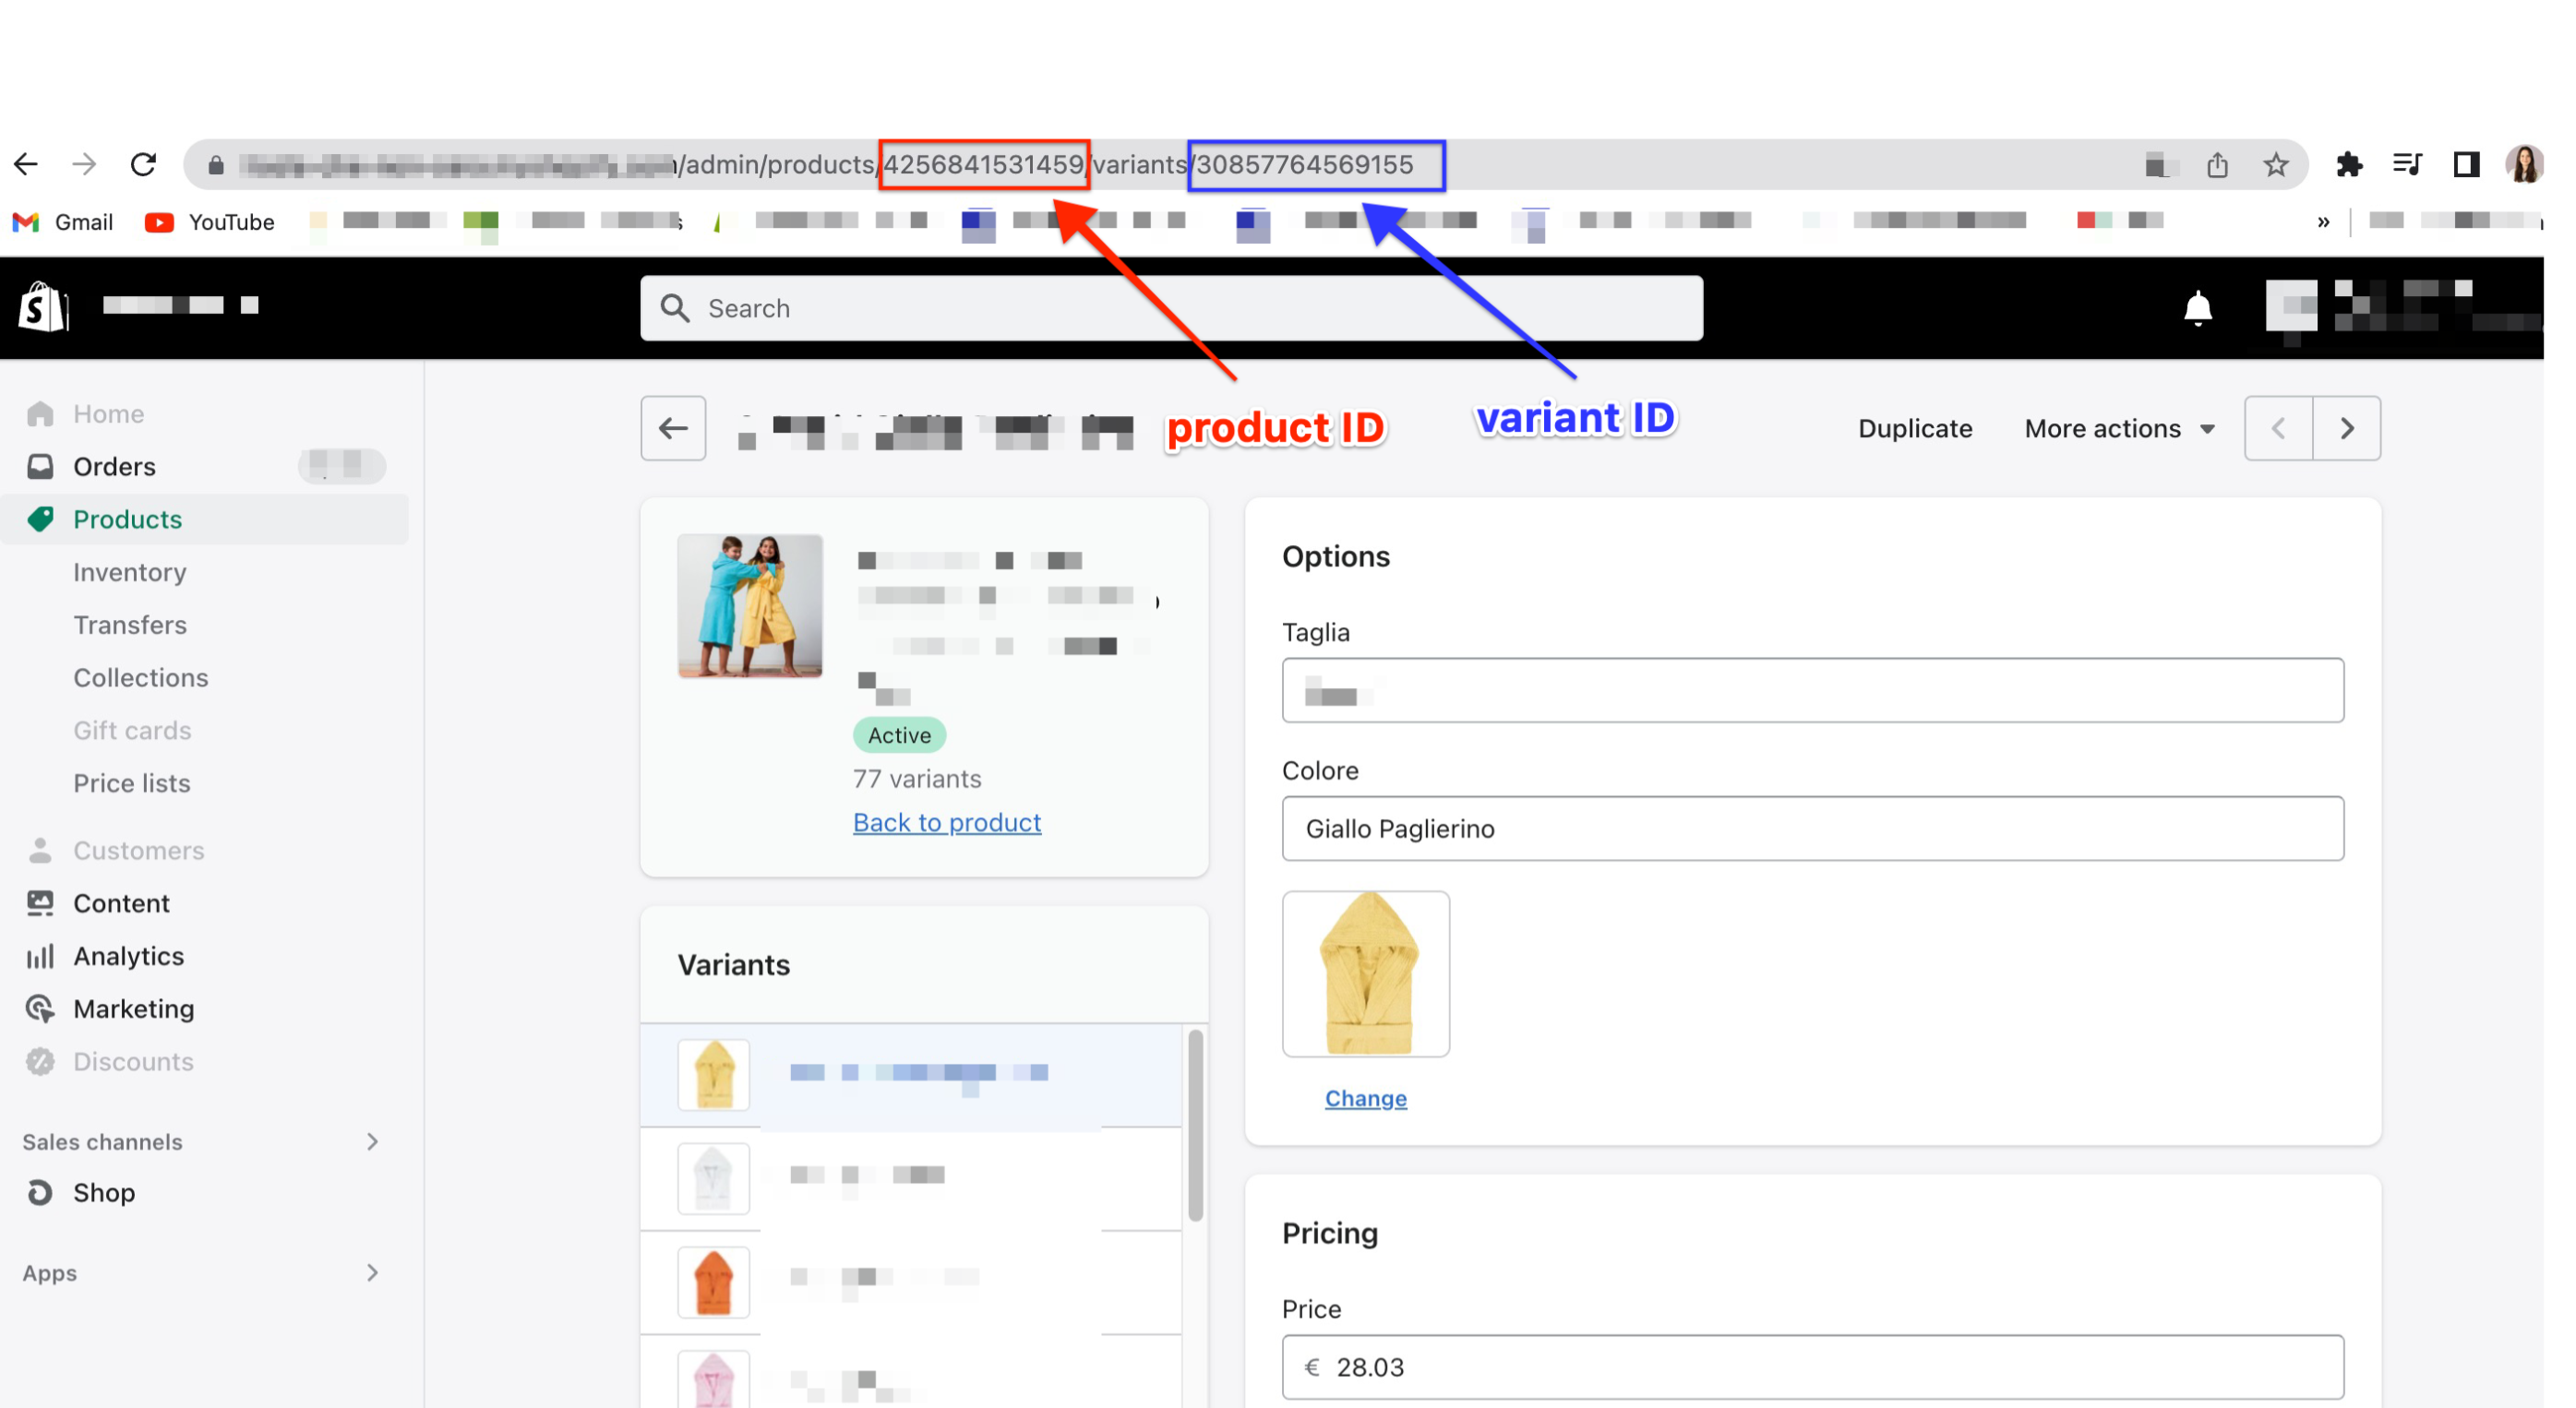 Find Product and Variant IDs